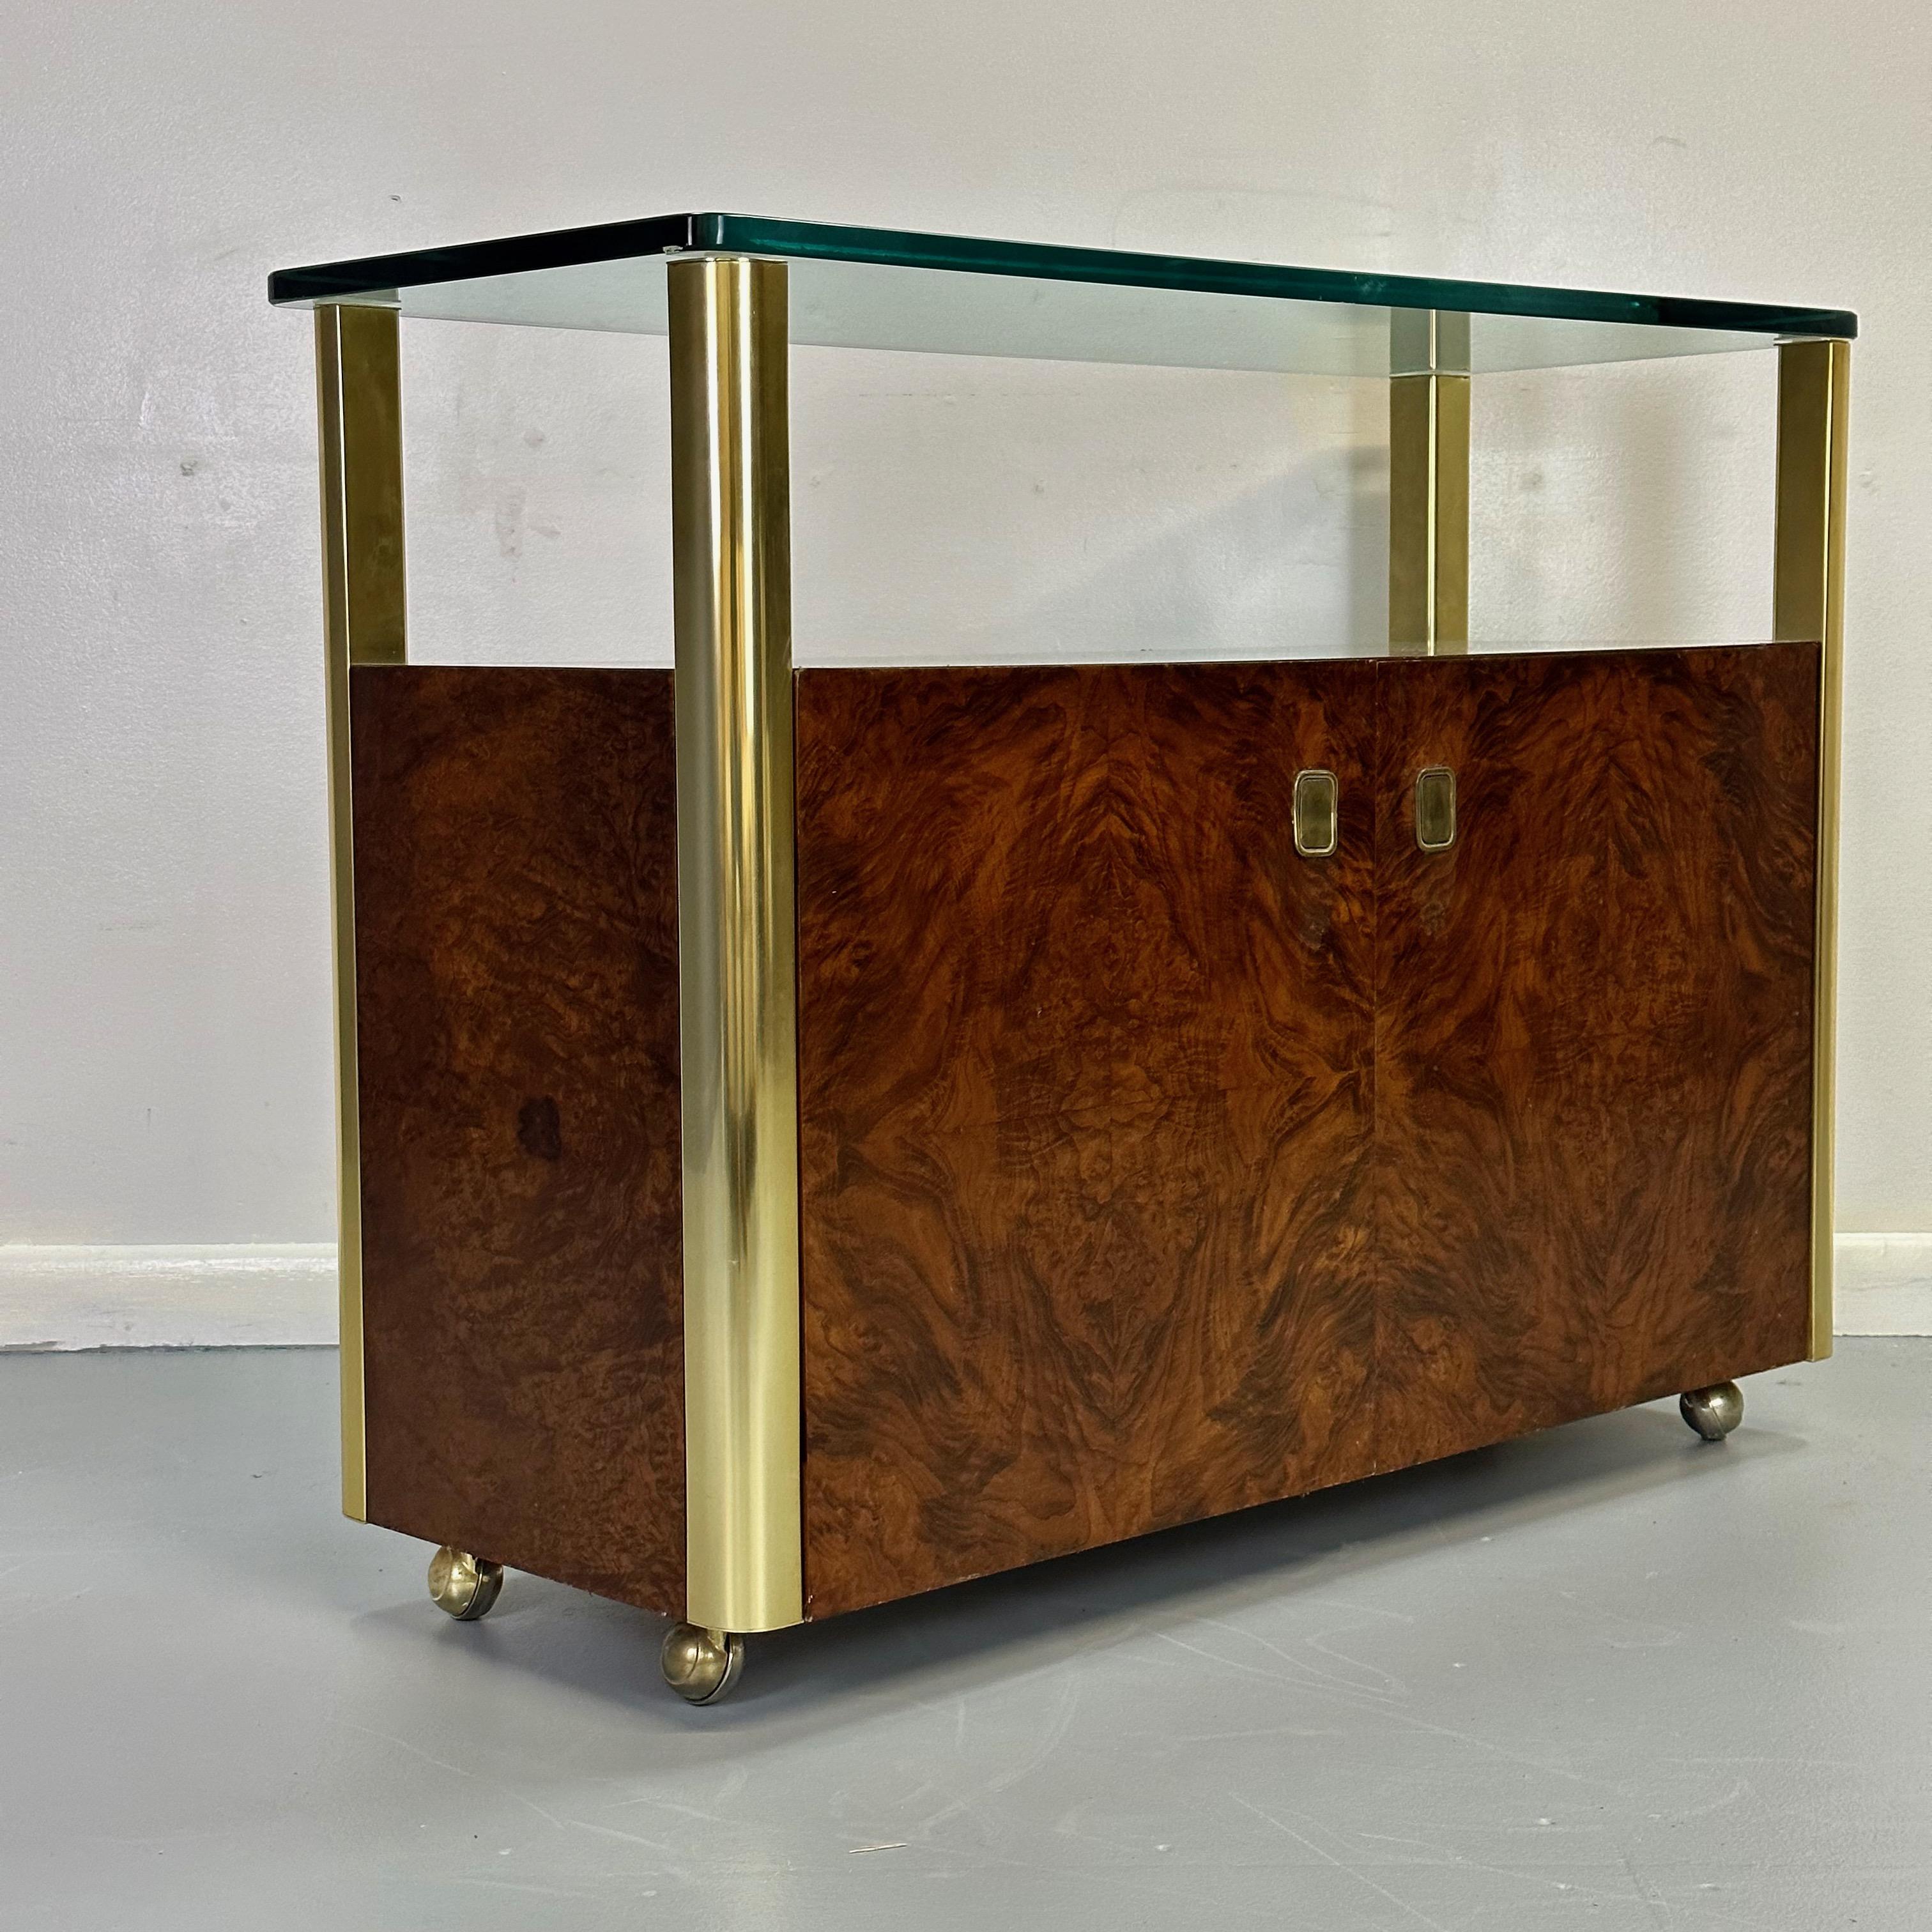 Vintage burl wood and brass bar cart designed and manufactured by Century Furniture Company in the United States, circa 1970's. This fabulous bar car features a thick glass top that sits over four brass columns, and a burl wood cabinet in the center